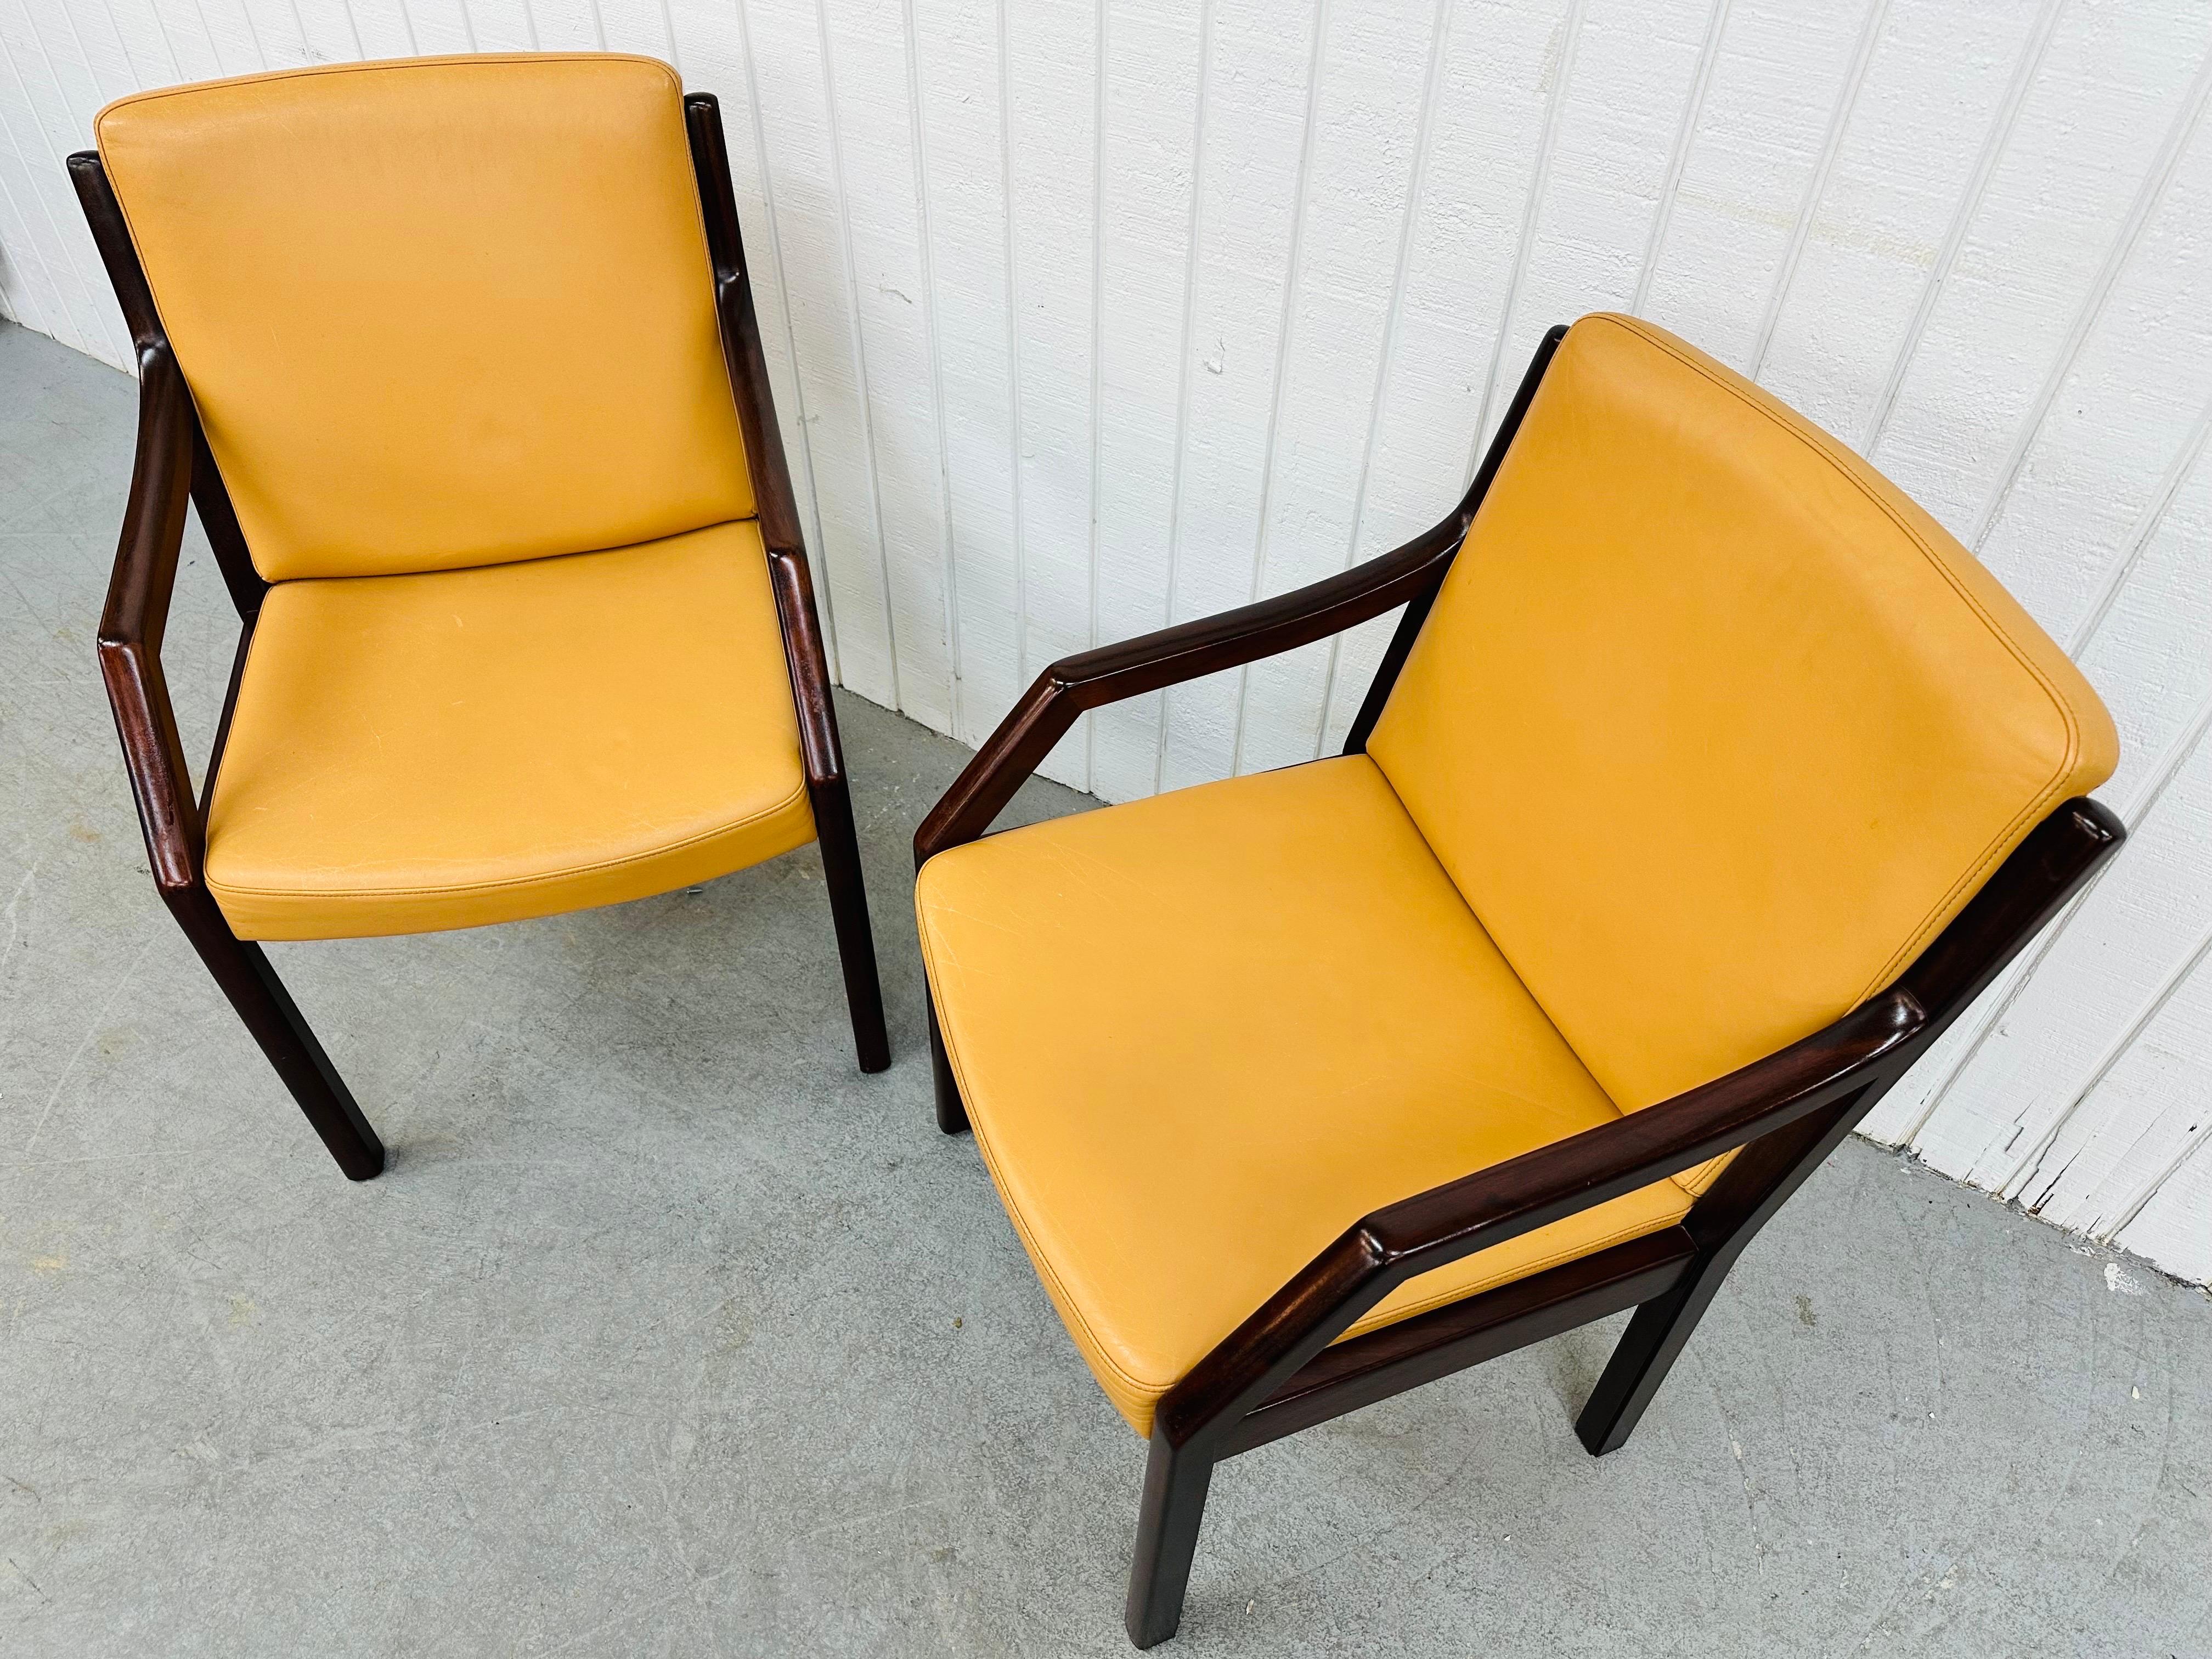 Vintage Dunbar Lounge Chairs - Set of 2 In Good Condition For Sale In Clarksboro, NJ